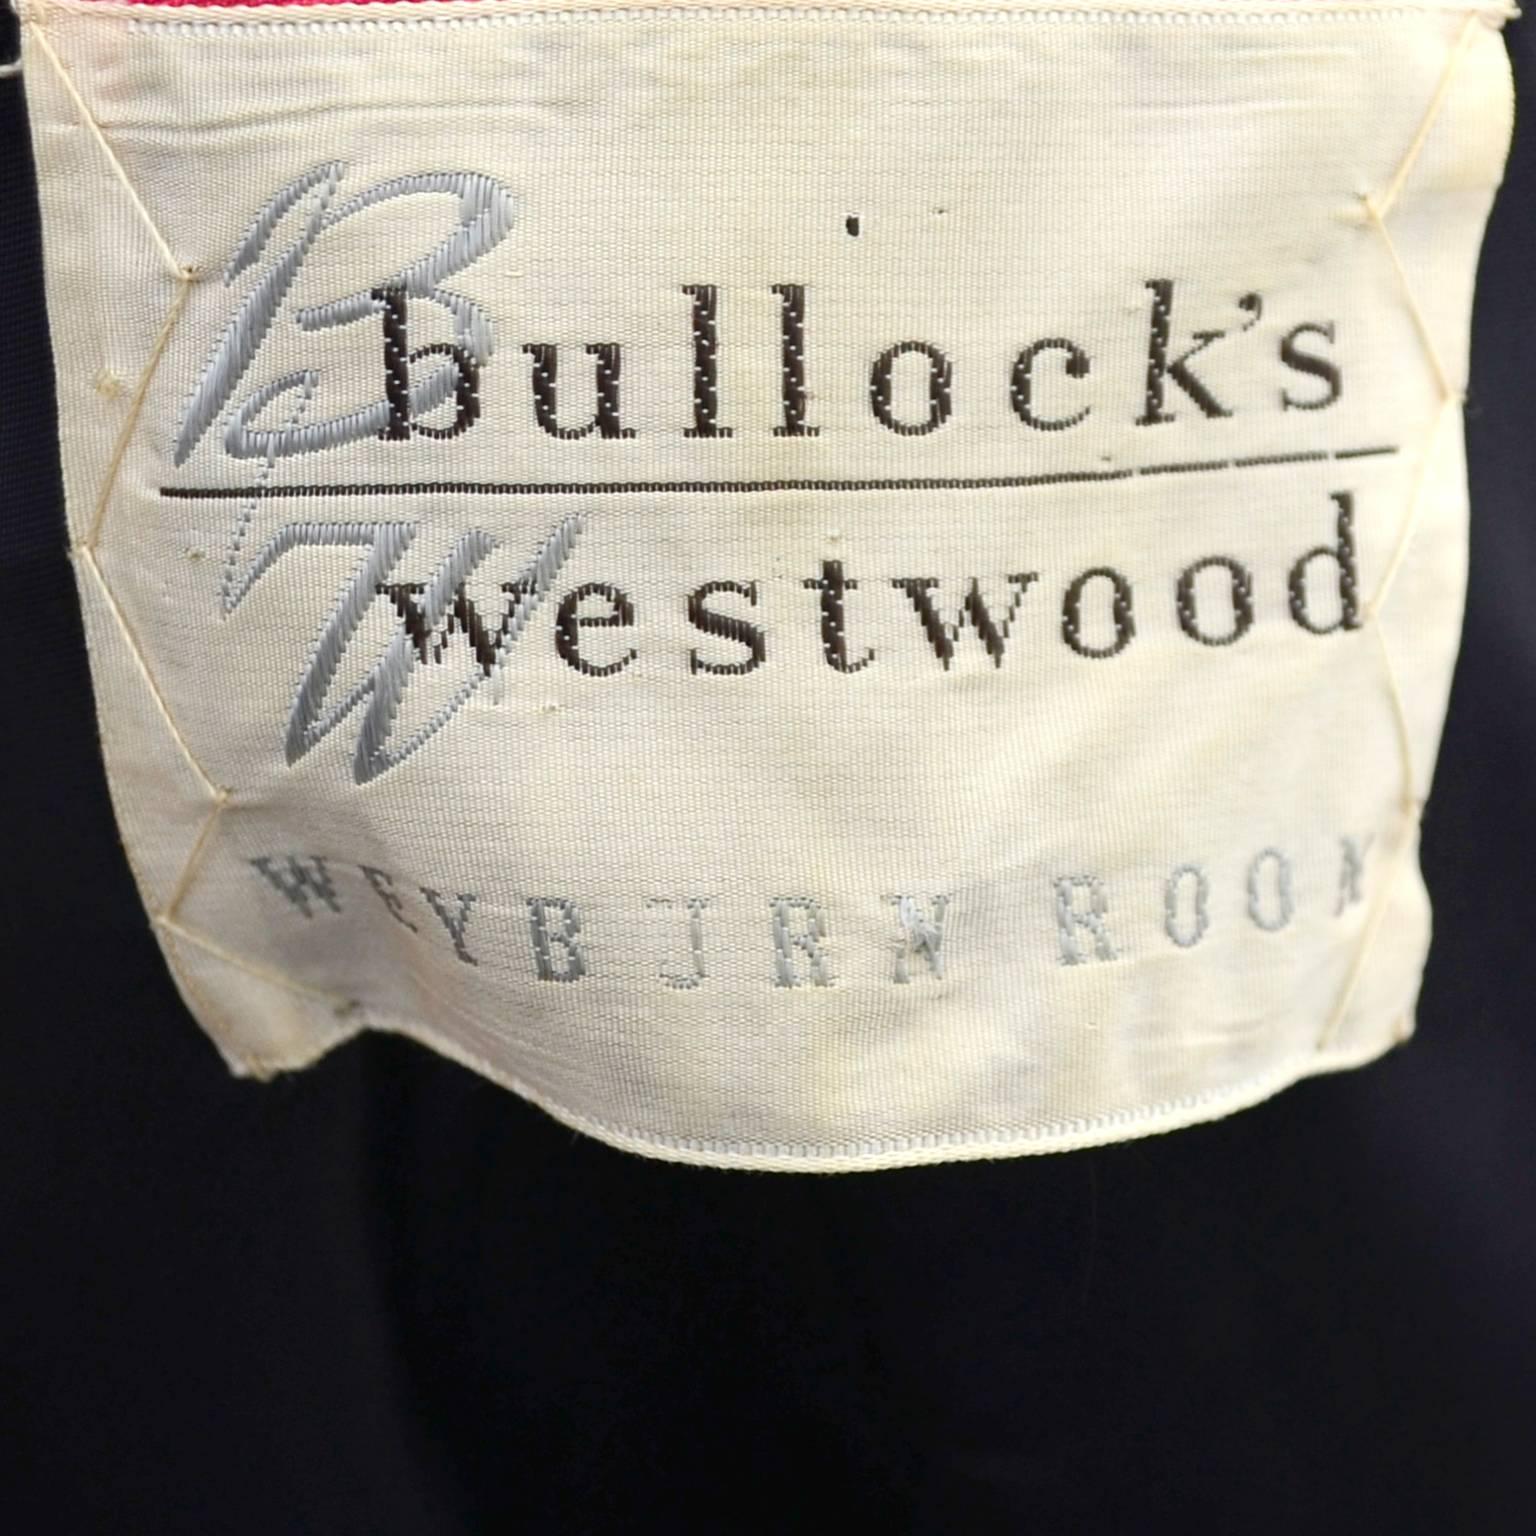 Red 1950s Pink Evening Coat from Bullocks Westwood Weyburn Room